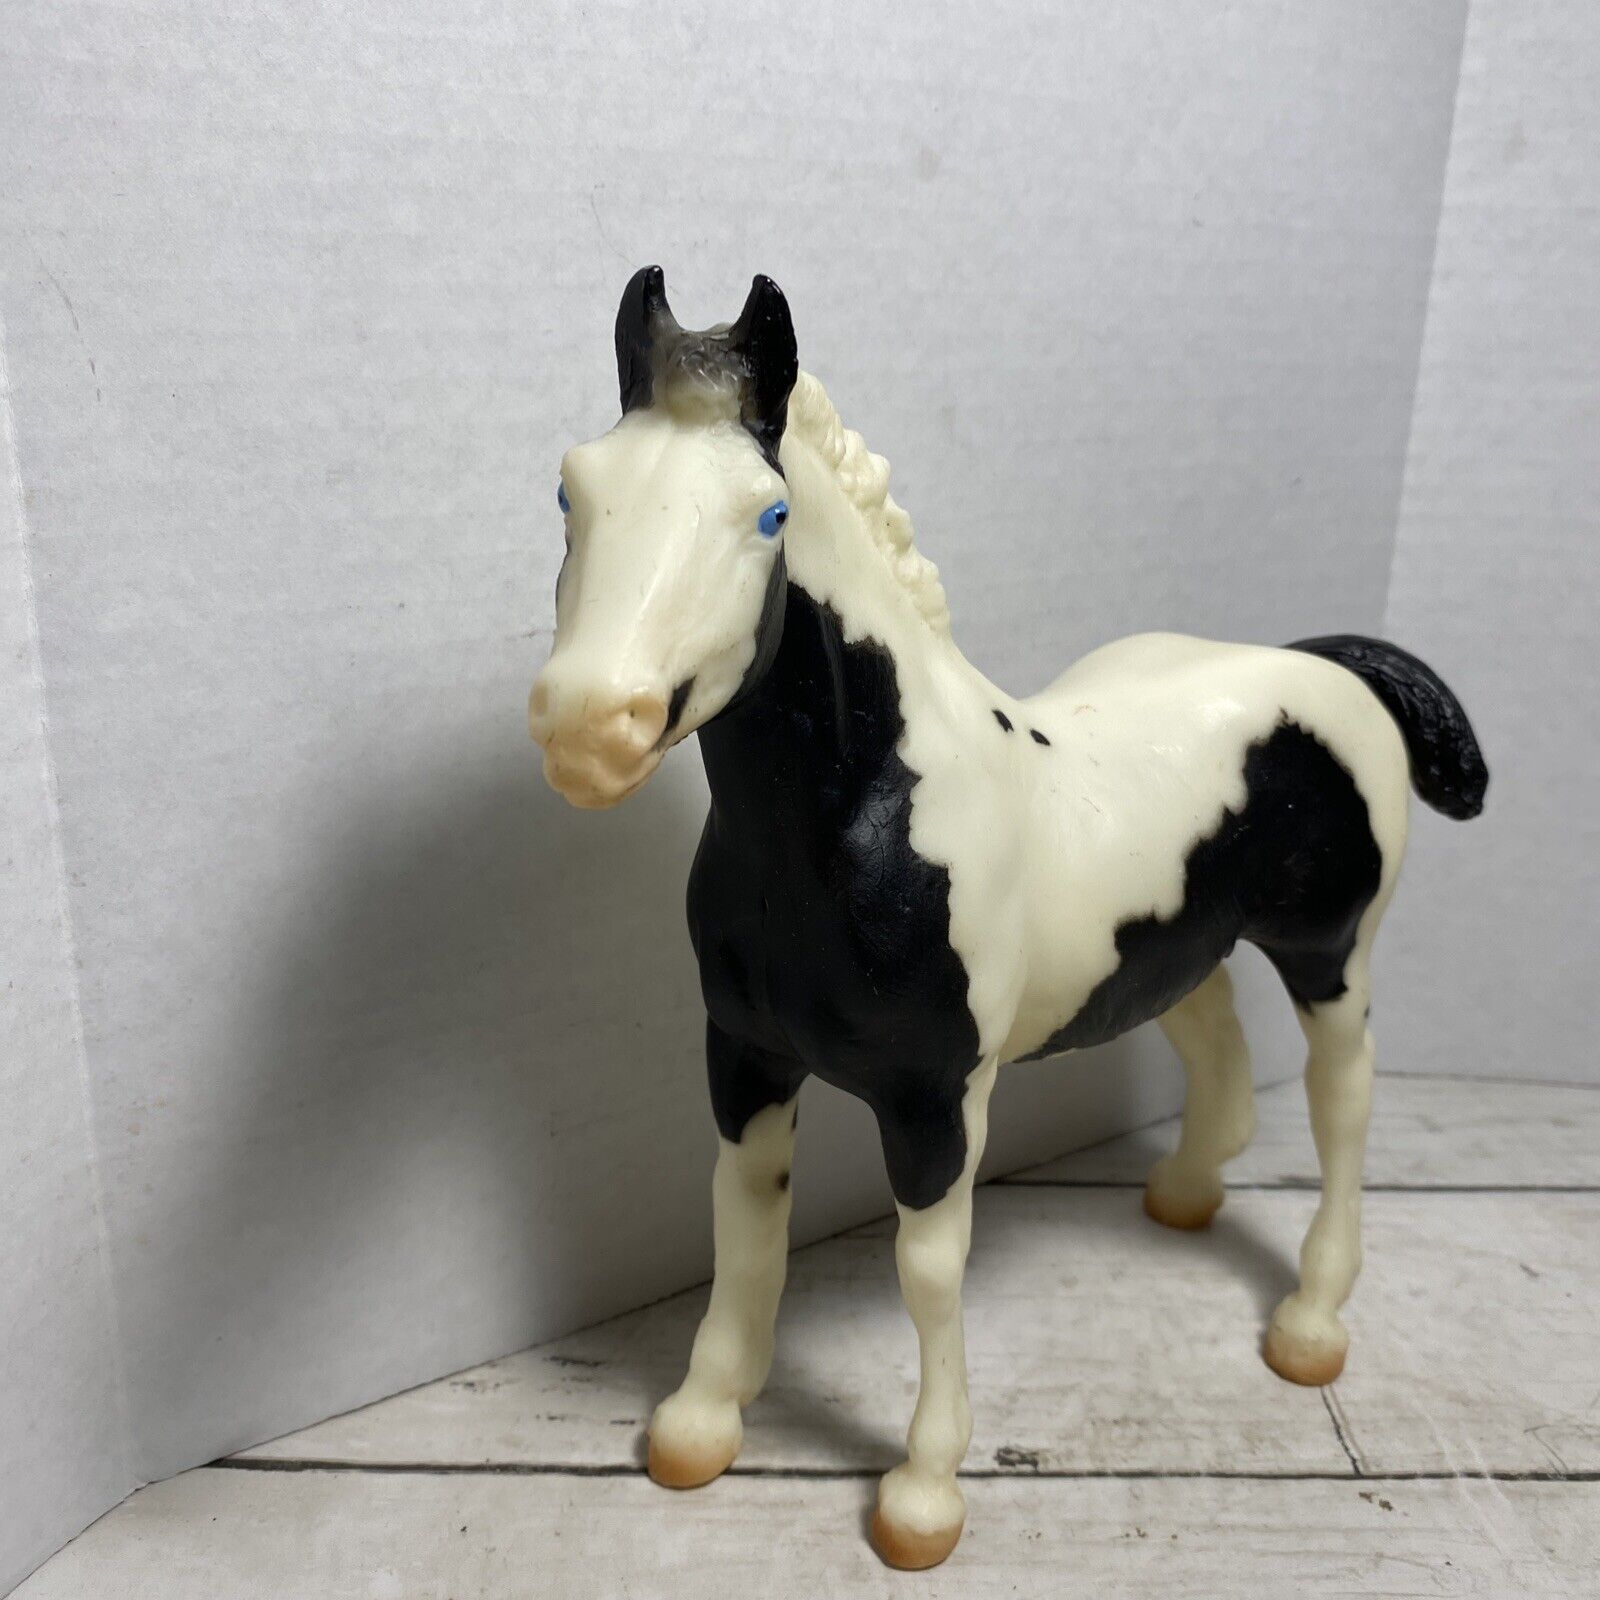 Retired Clydesdale Breyer Horse #776 Spotted Draft Foal Black Pinto